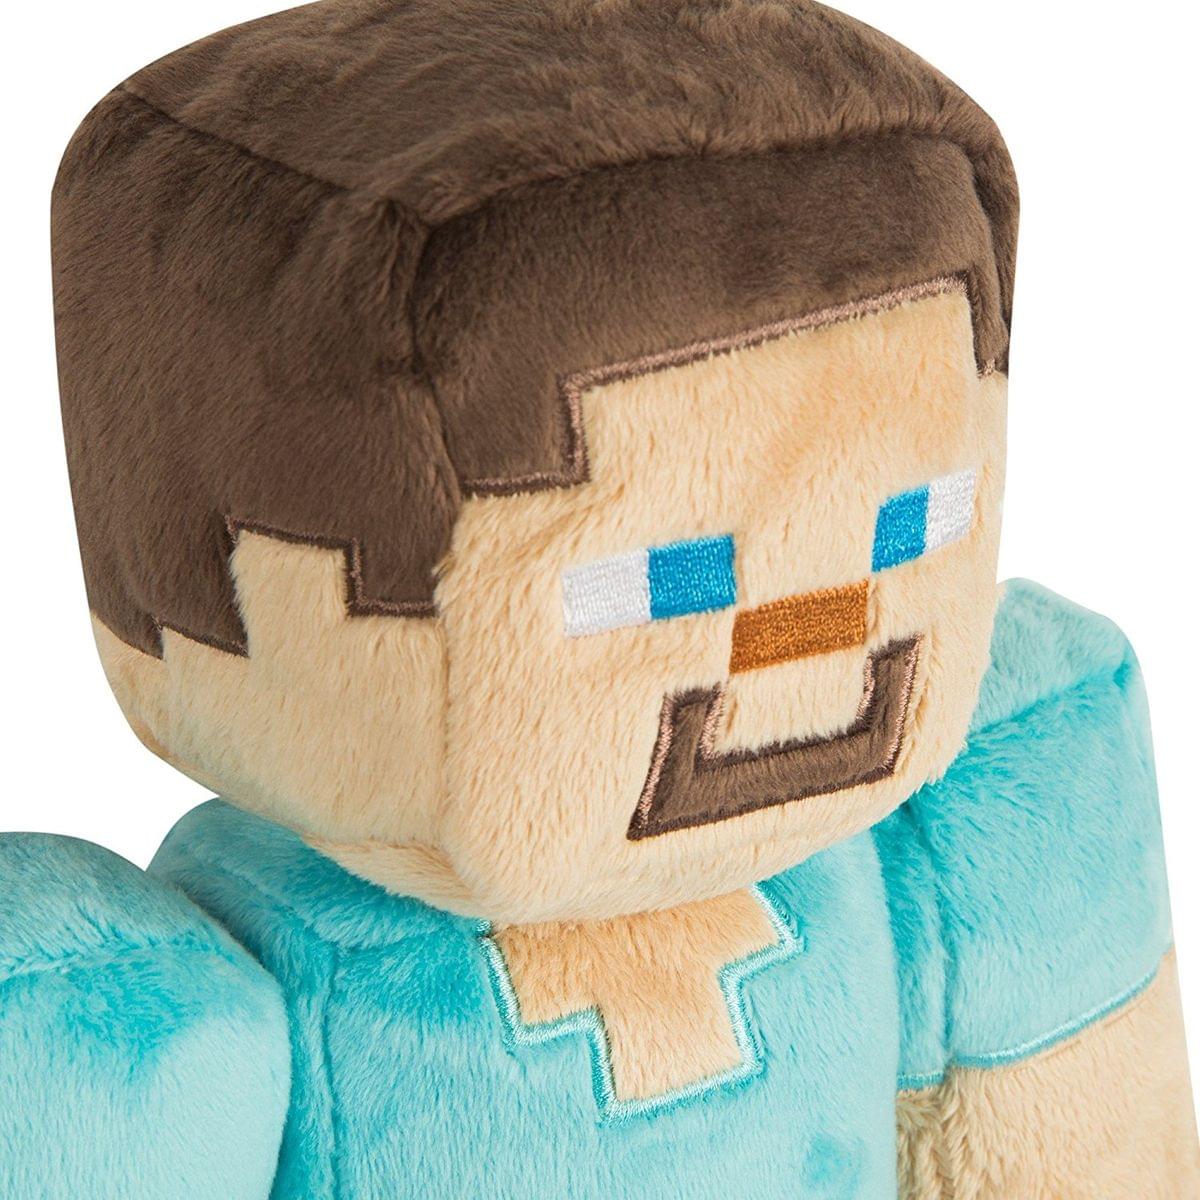 Minecraft Steve with Hang Tag Plush - image 2 of 2